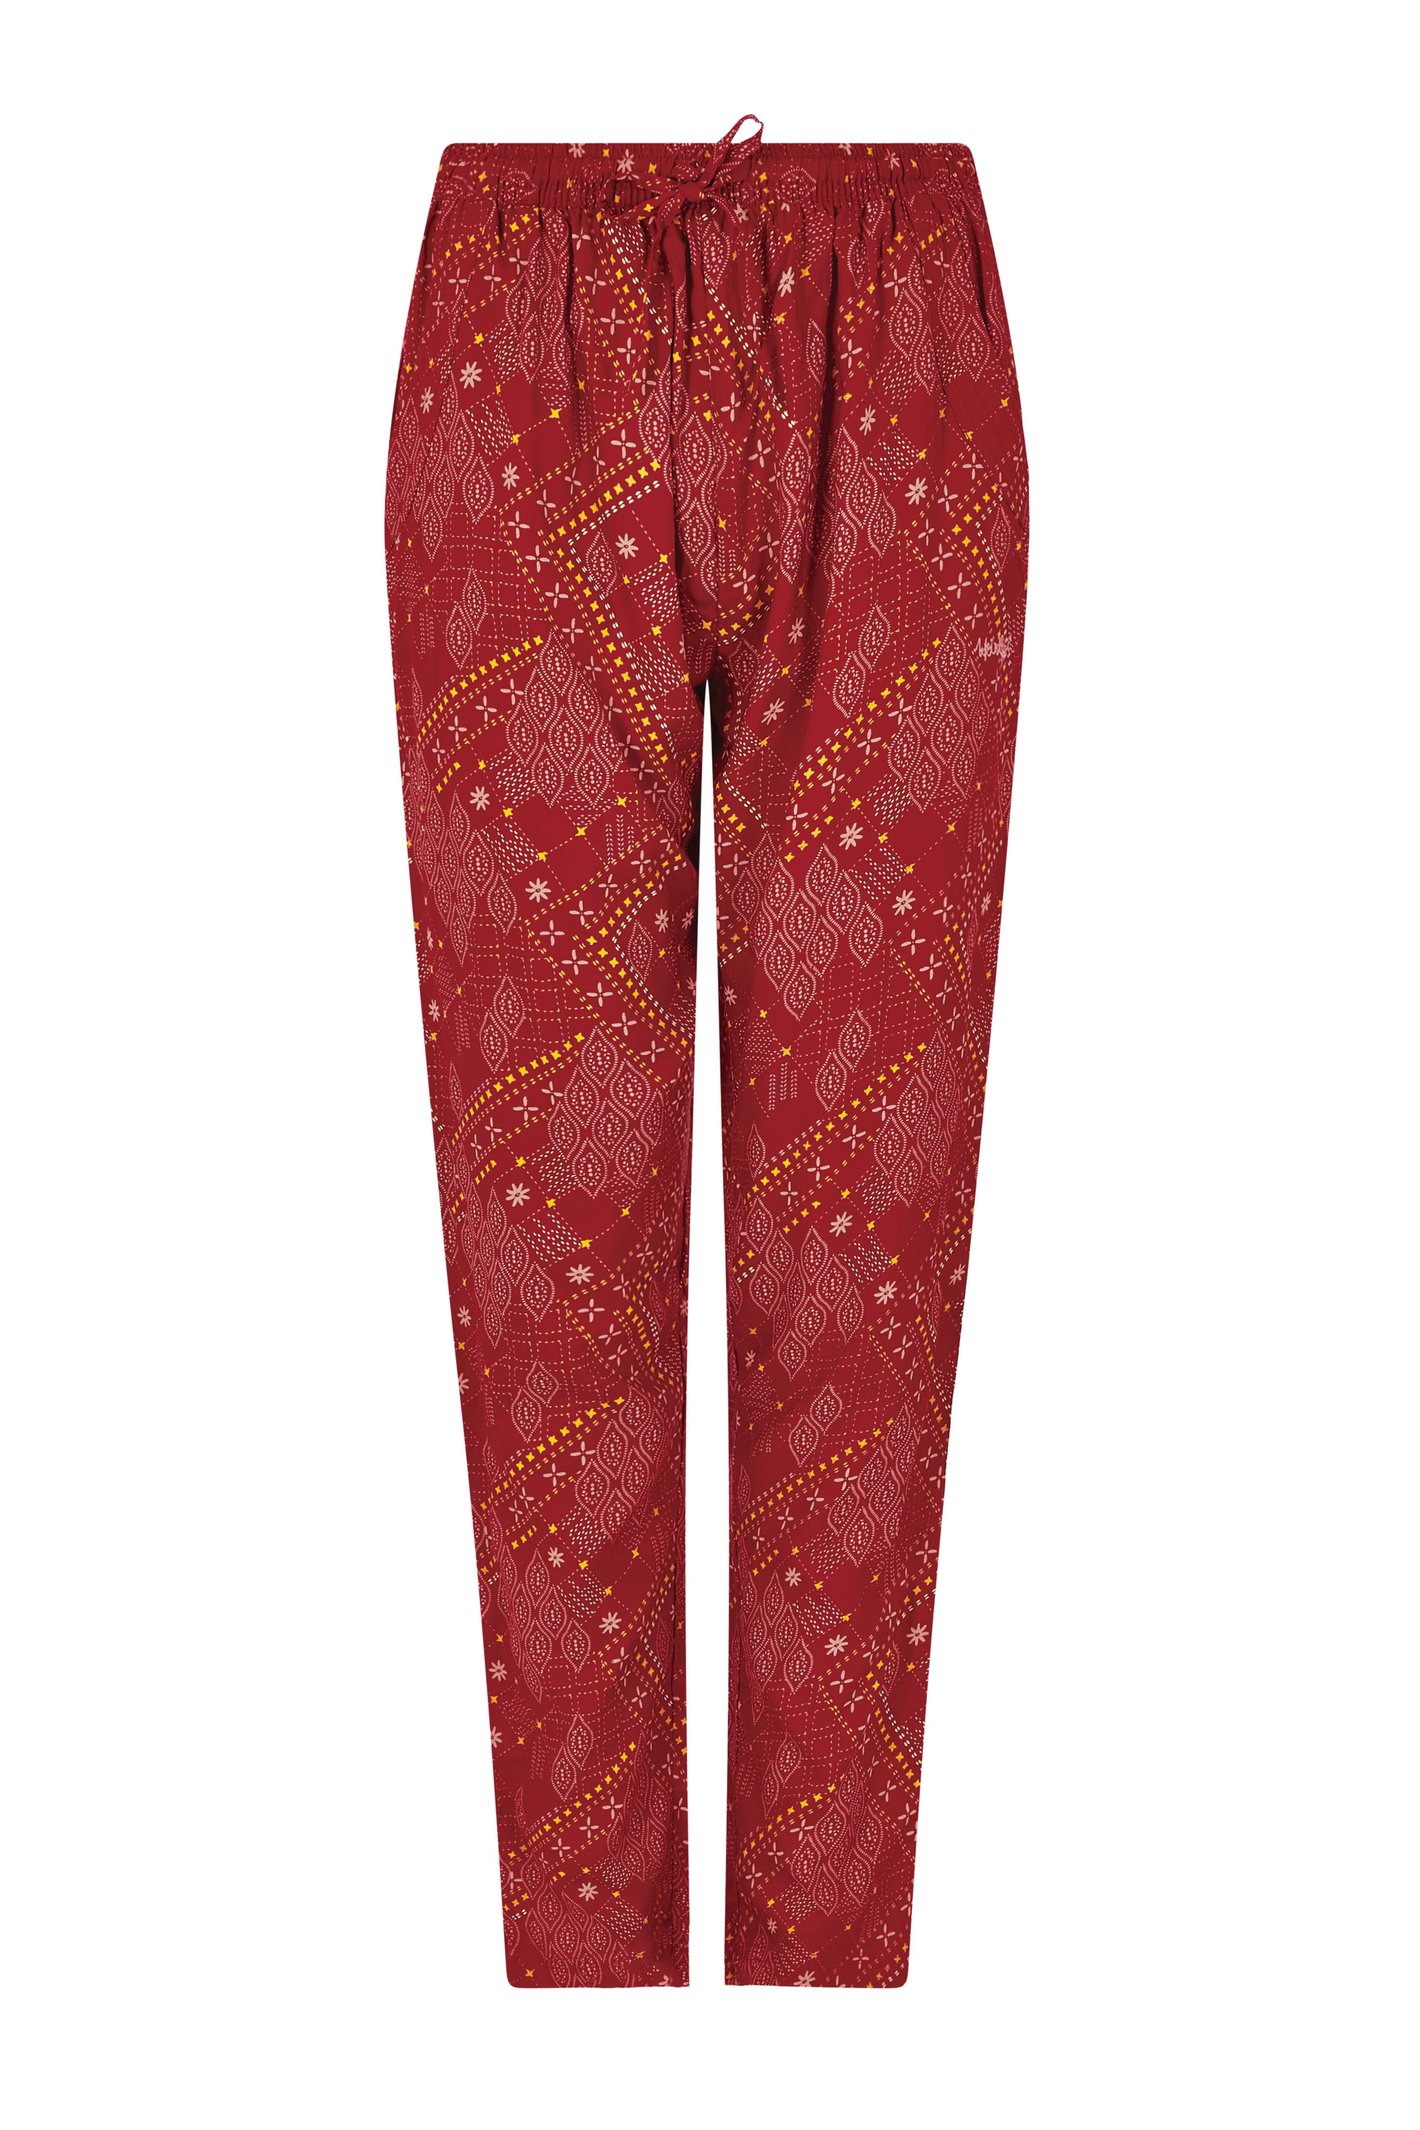 Weird Fish Tinto Eco Viscose Printed Trousers Chilli Red Size 20